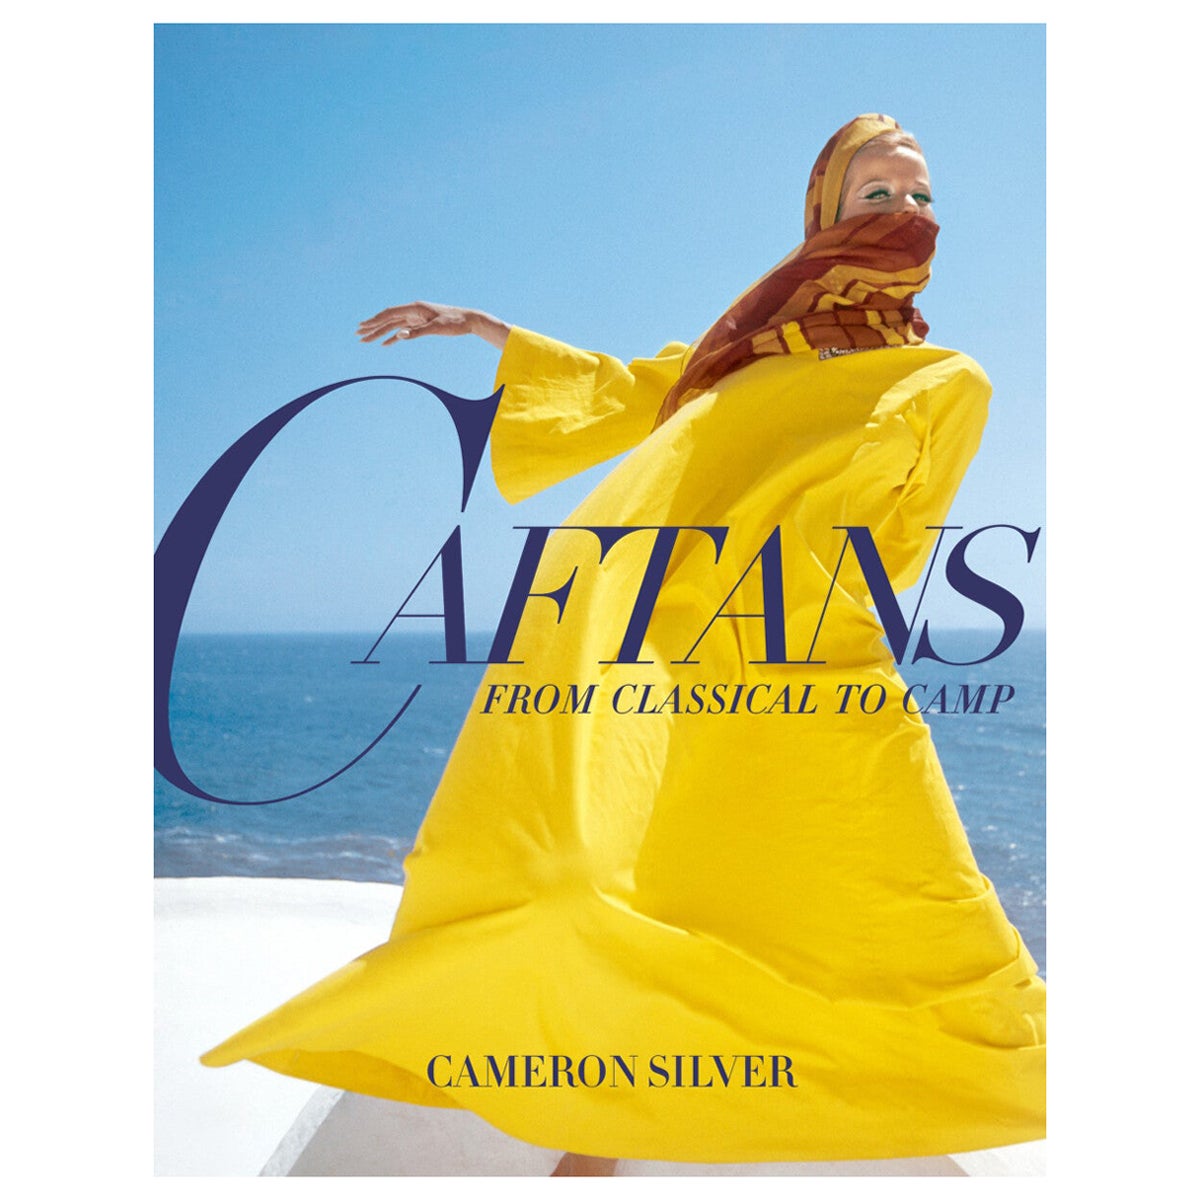 Caftans From Classical to Camp Book by Cameron Silver For Sale